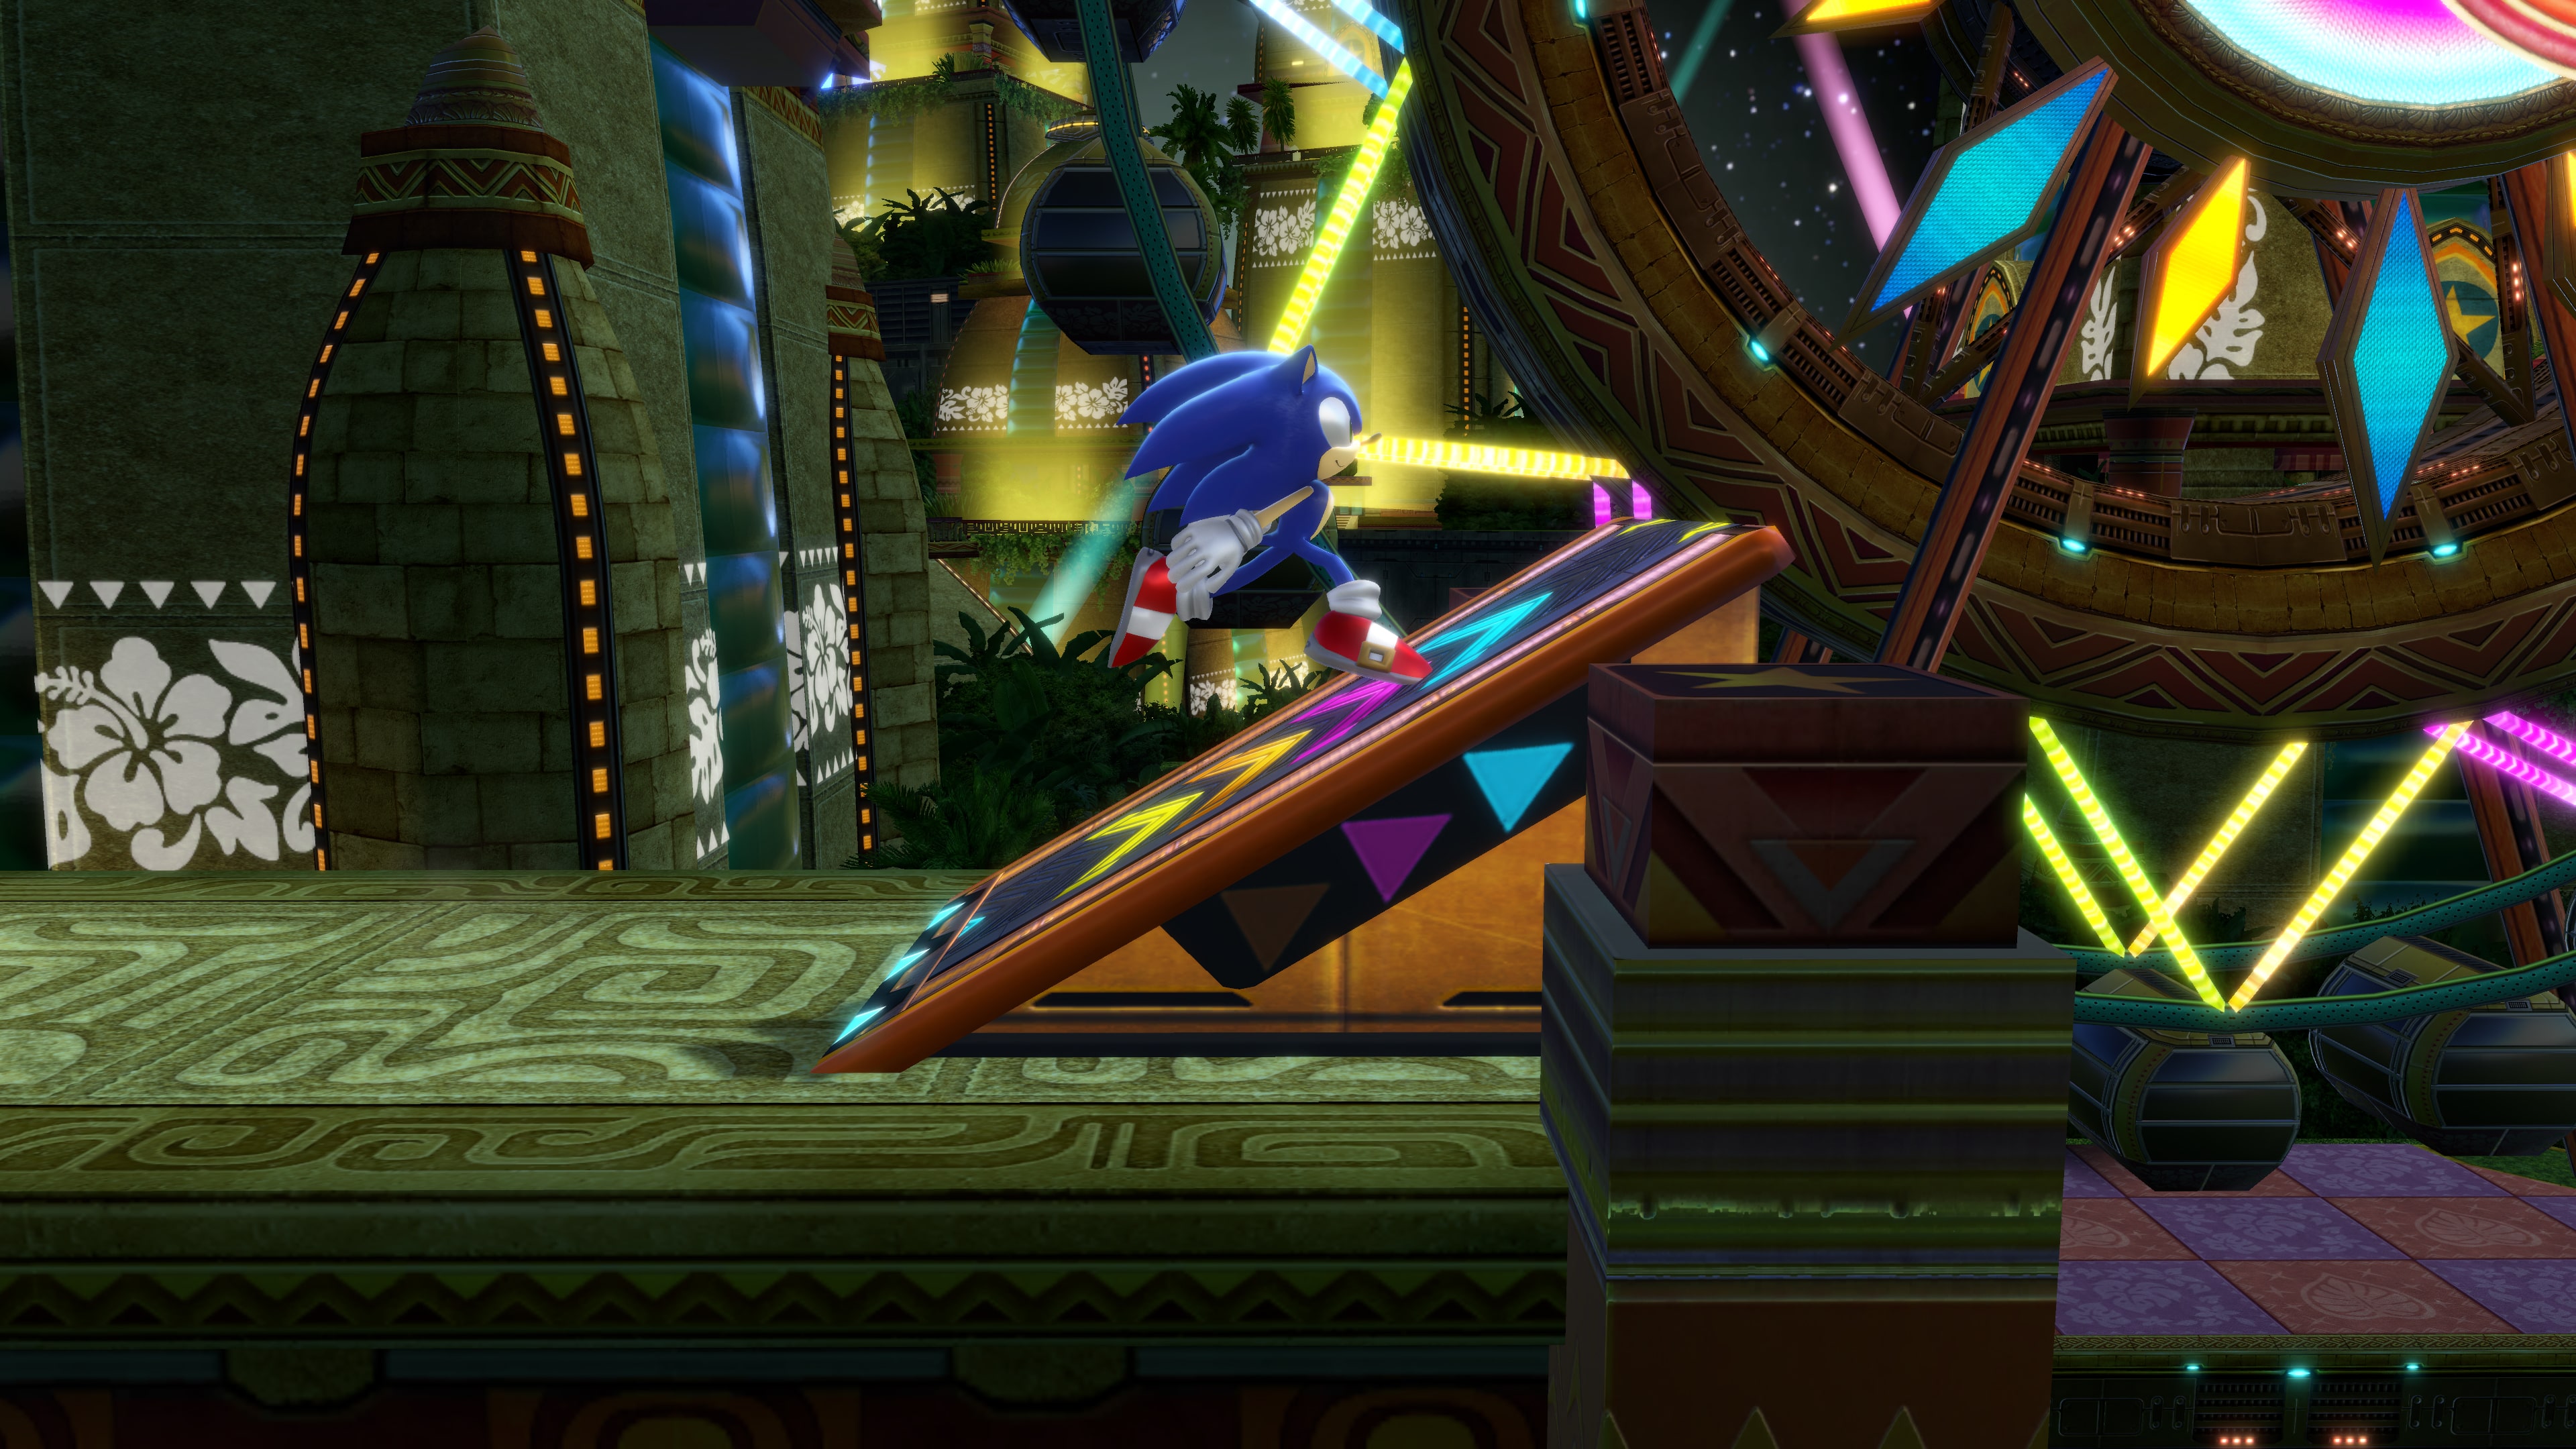 Sonic Colors: Ultimate - Digital Deluxe